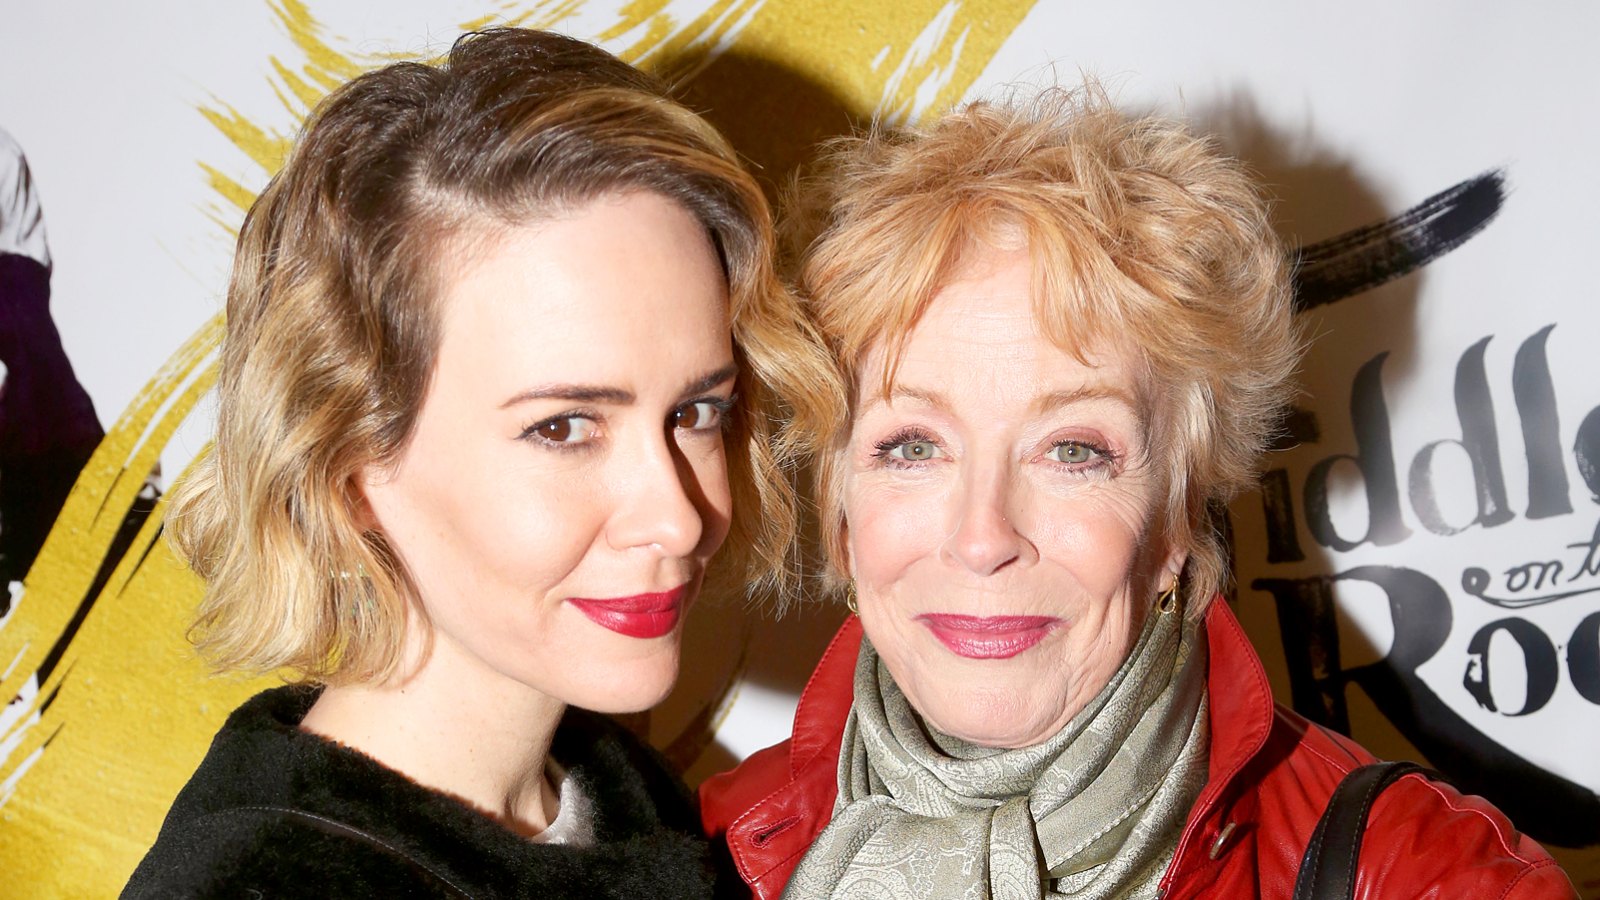 Sarah Paulson and Holland Taylor attend the opening night for "Fiddler On The Roof" on Broadway at The Broadway Theatre on December 20, 2015 in New York City.